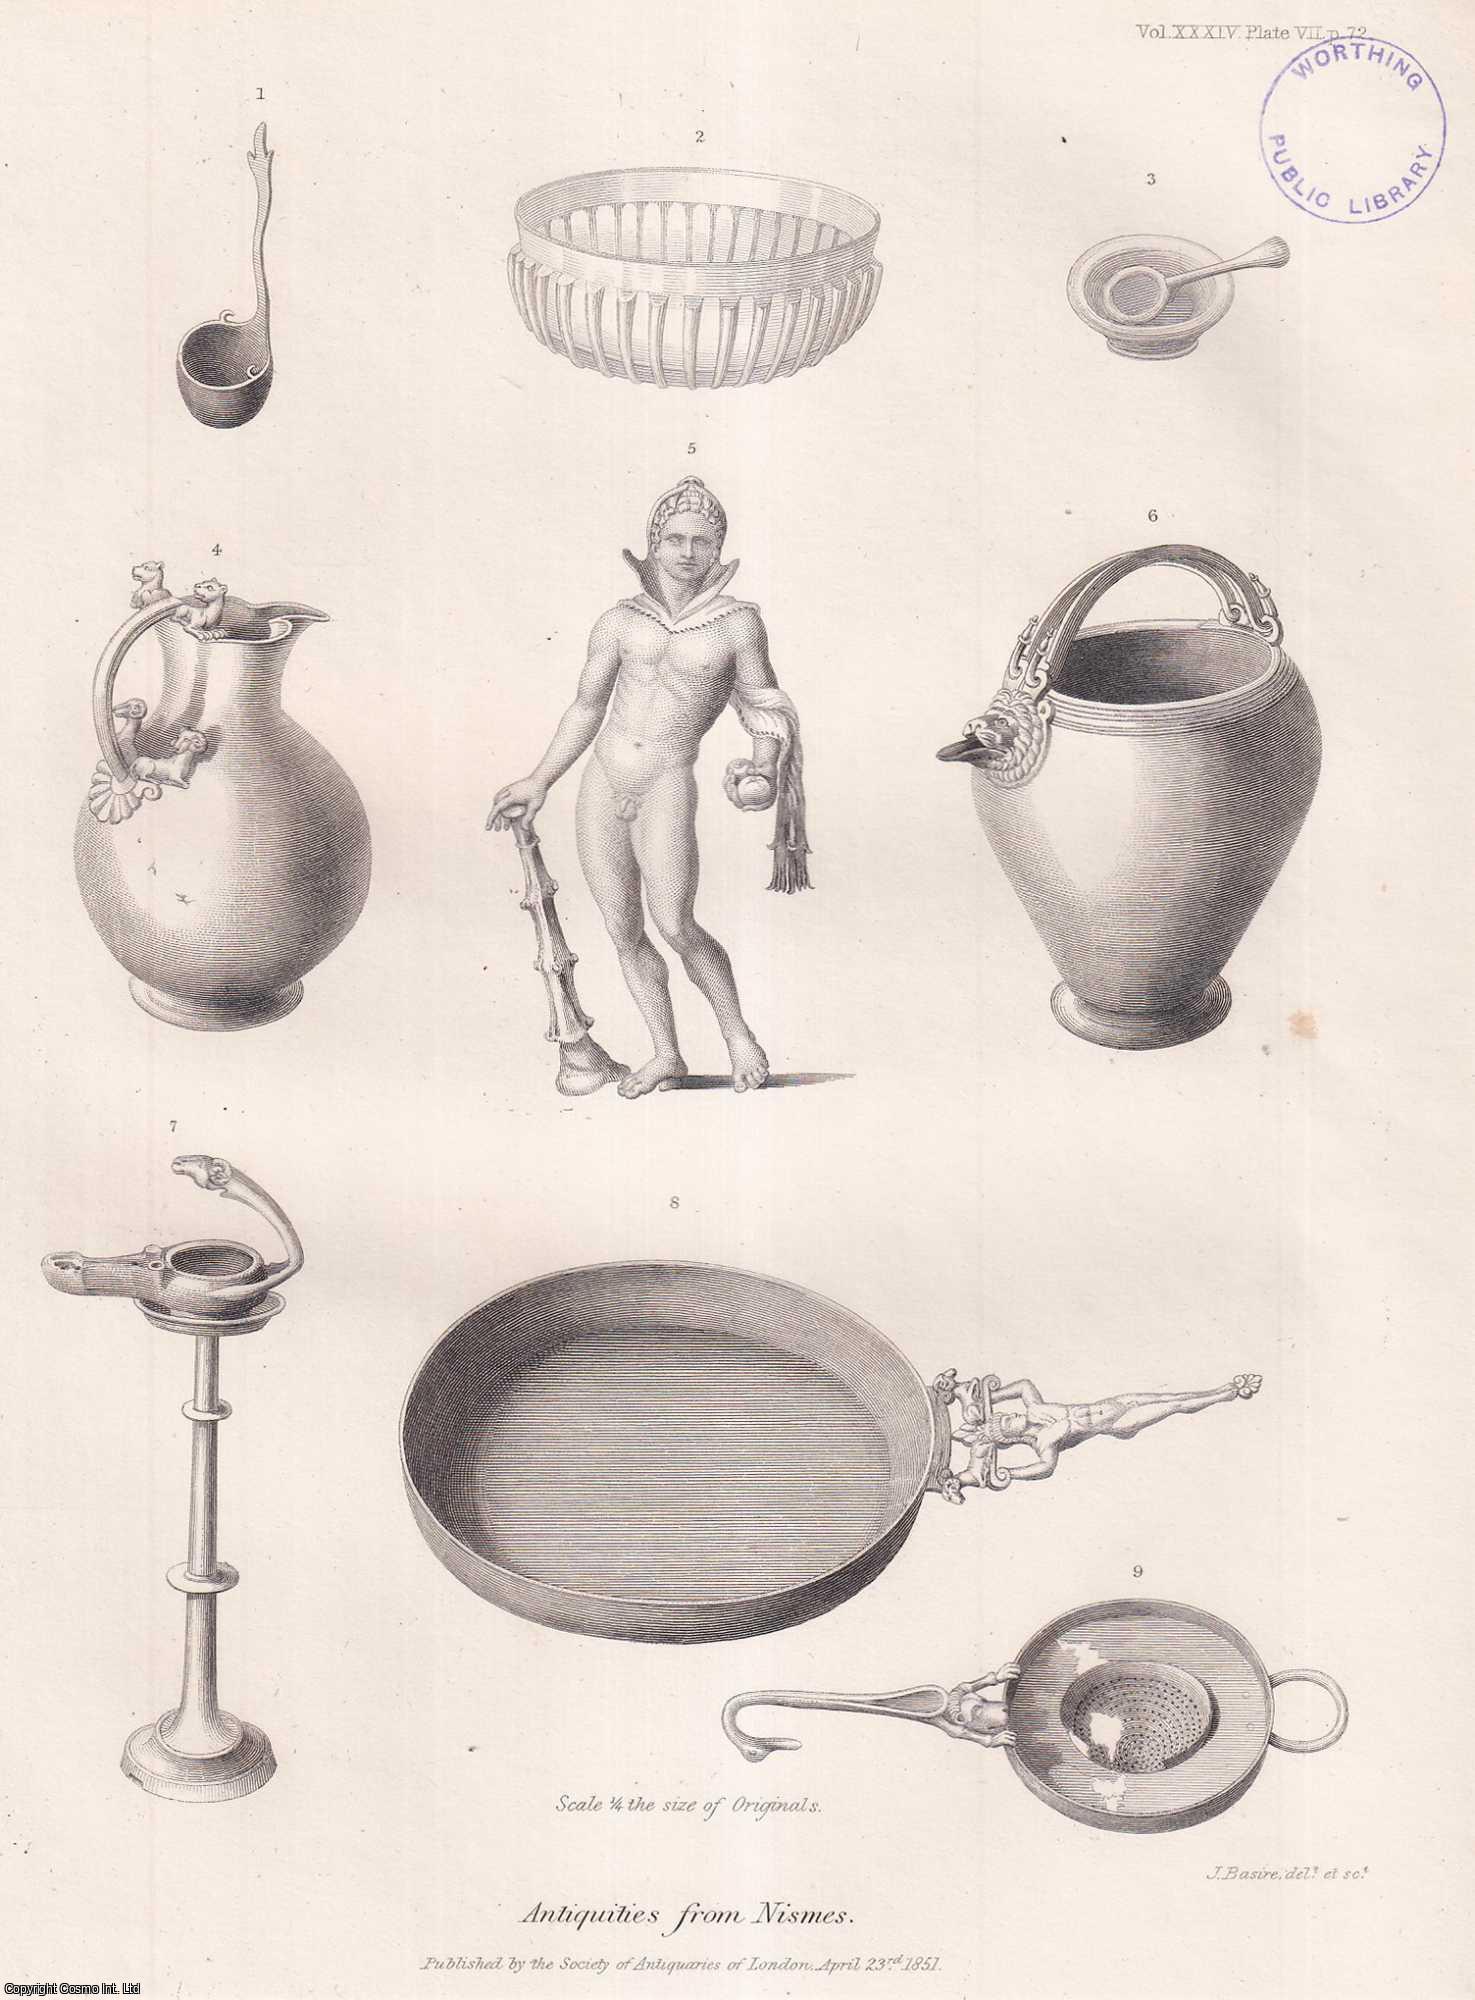 WILLIAM CHAFFERS - Communication accompanying the Exhibition of numerous Glass Vessels, and other Antiquities of the Roman Period, found at Nismes. A rare original article from the journal Archaeologia, 1852.